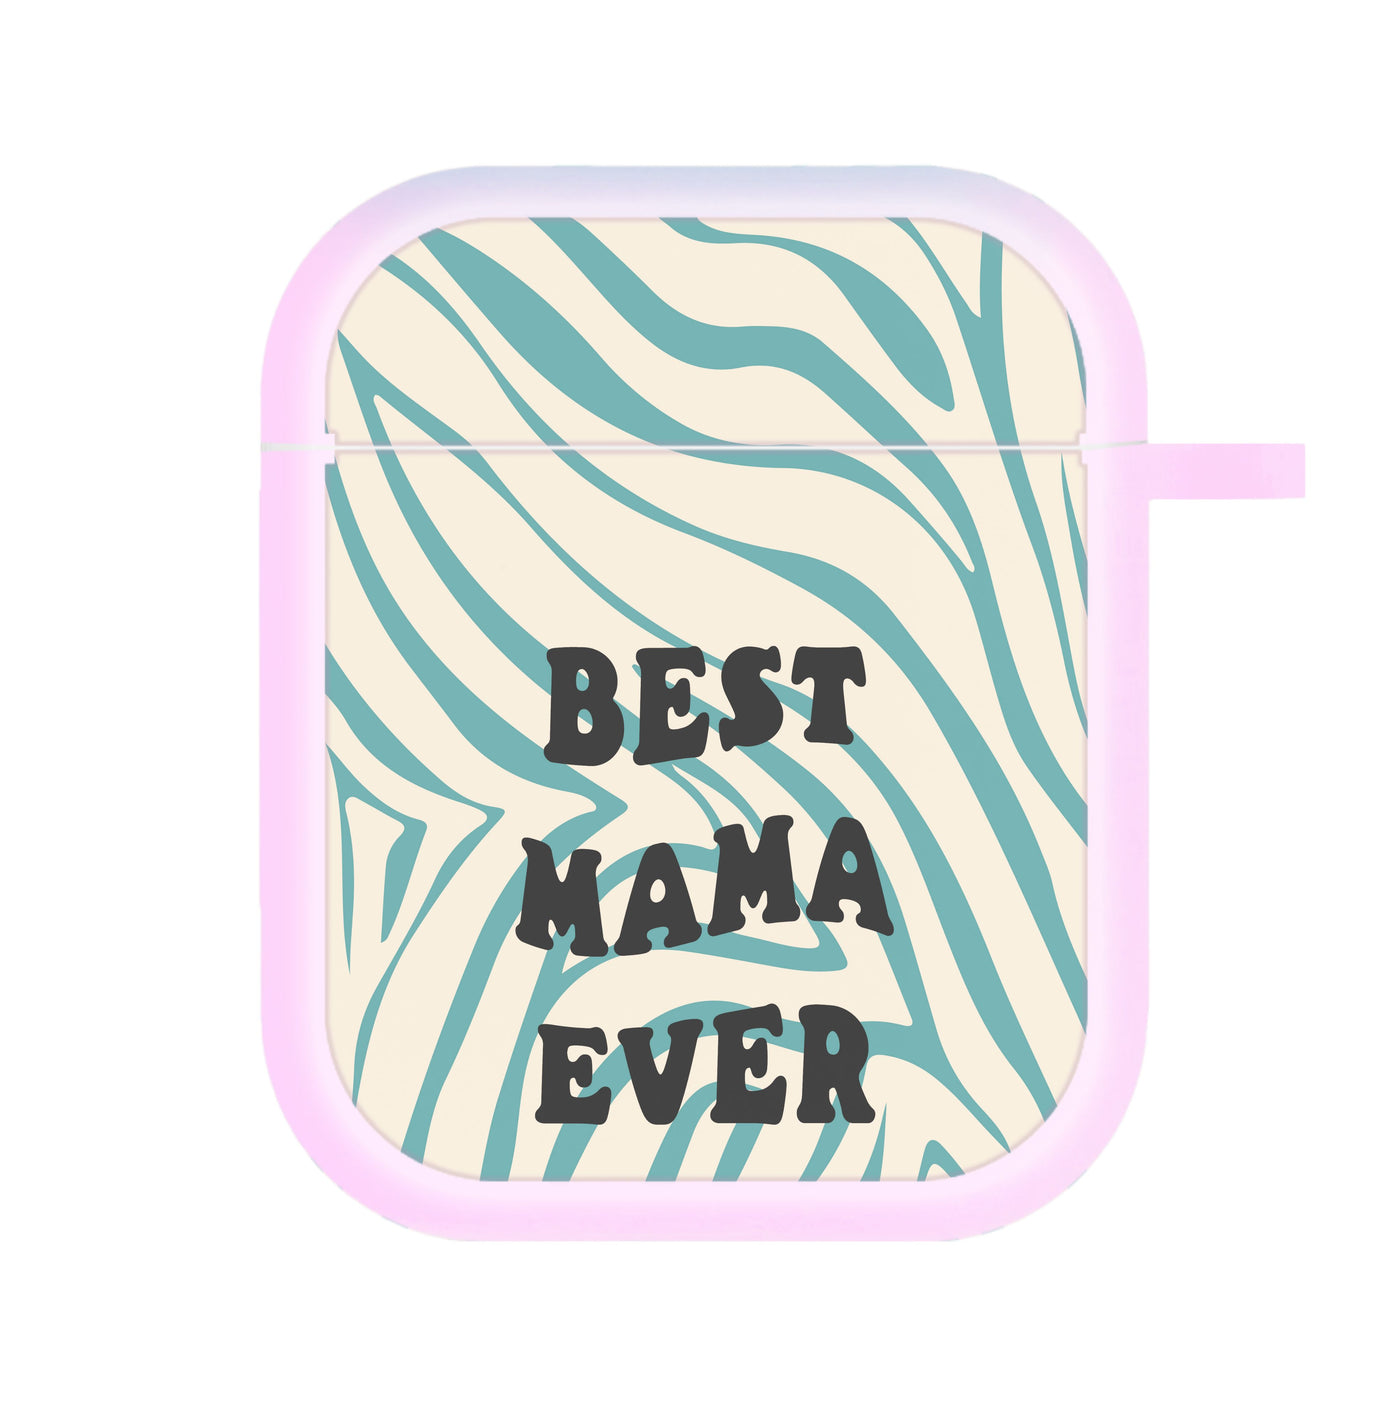 Best Mama Ever - Personalised Mother's Day AirPods Case